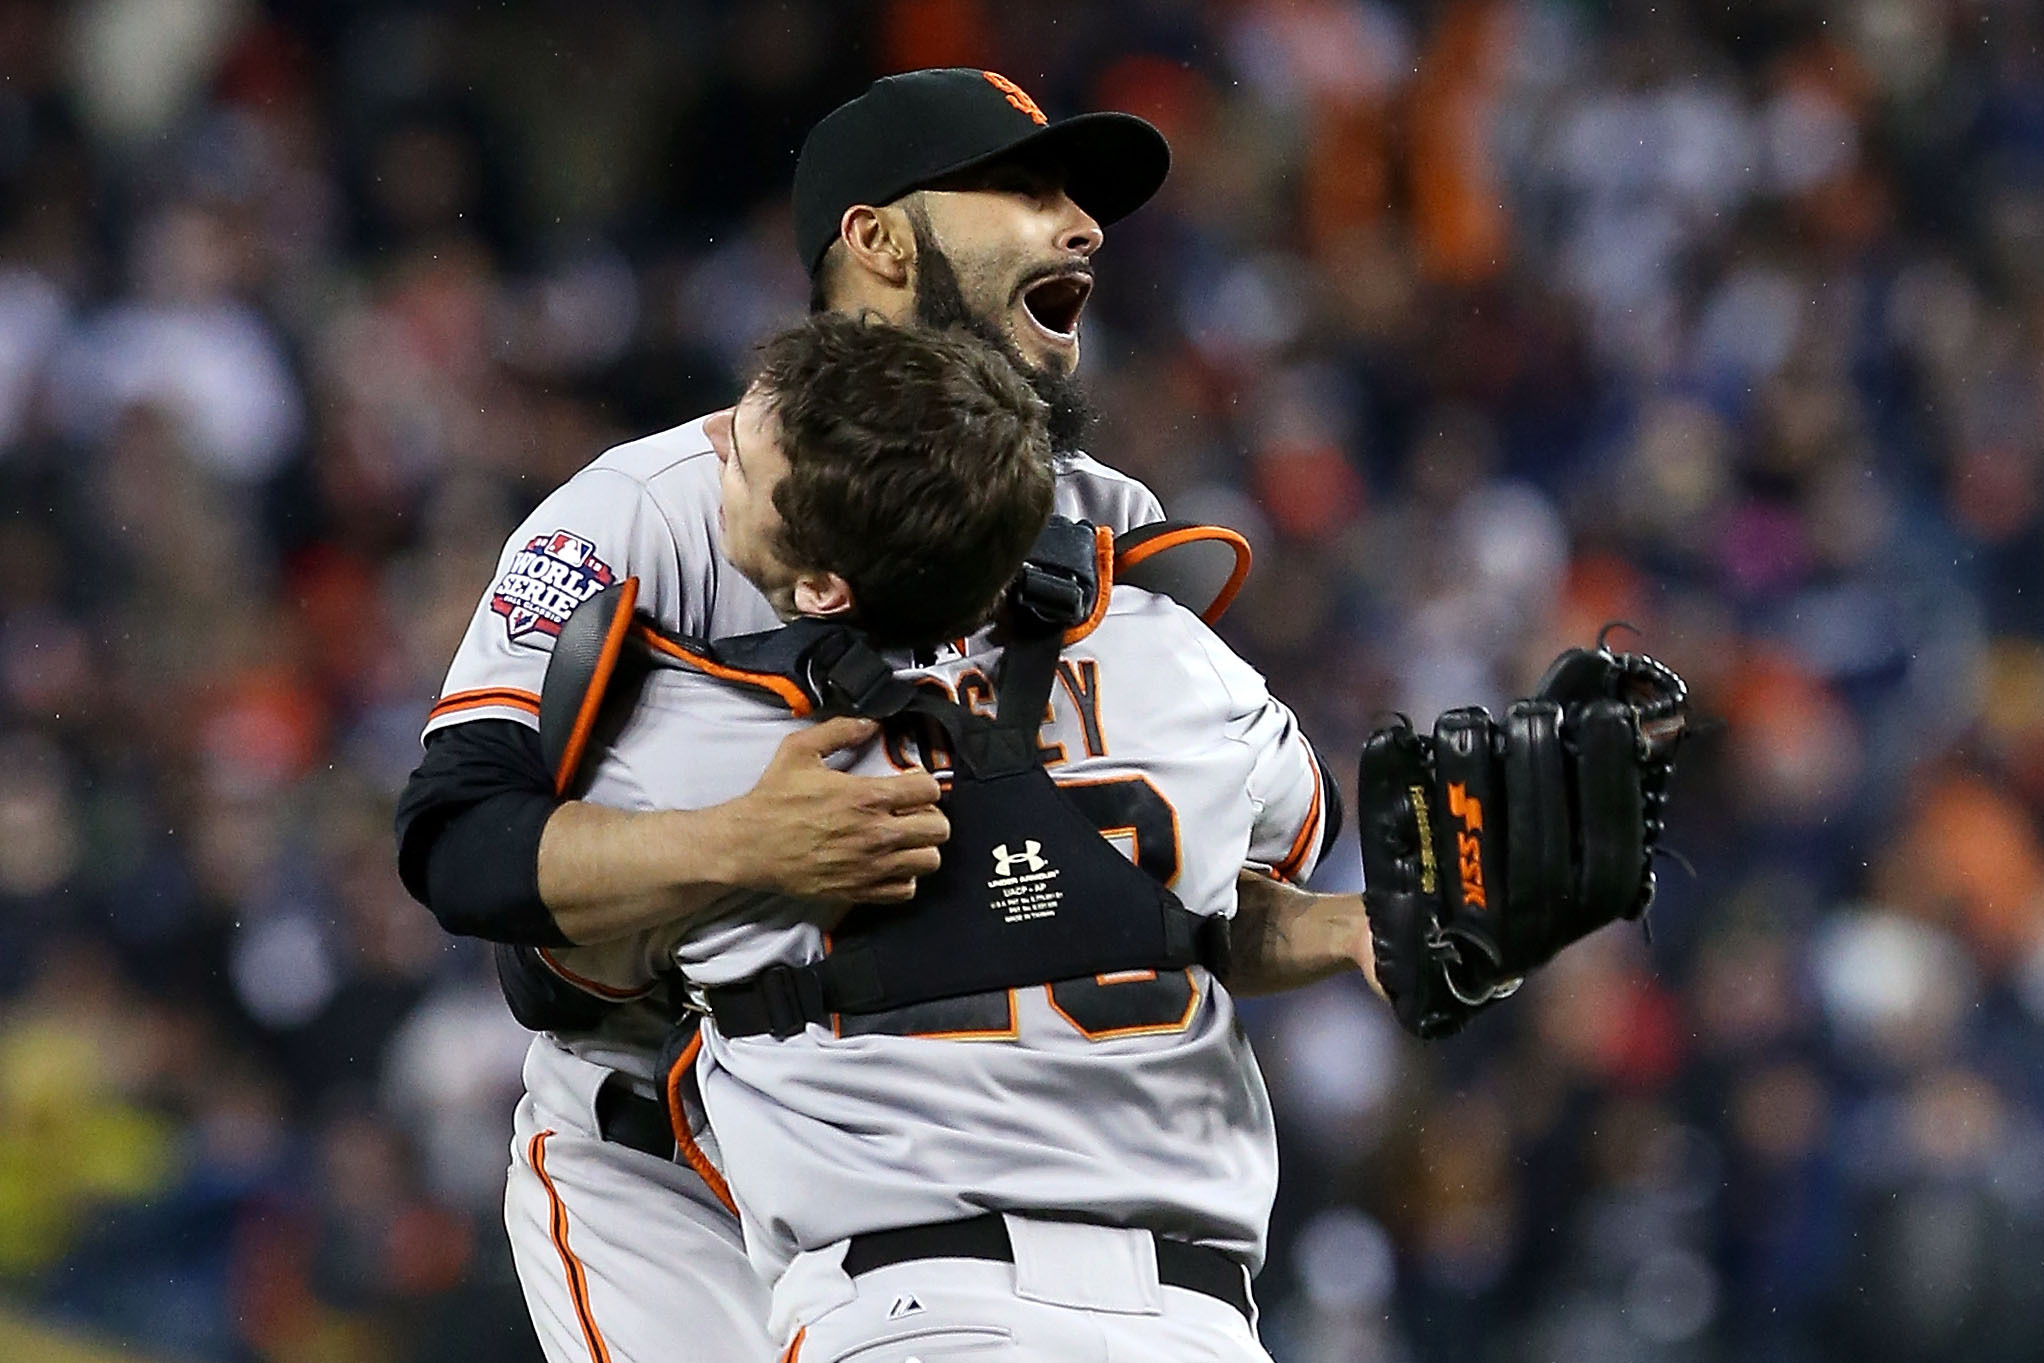 San Francisco Giants Clinch 2012 World Series with 4-3 Win in